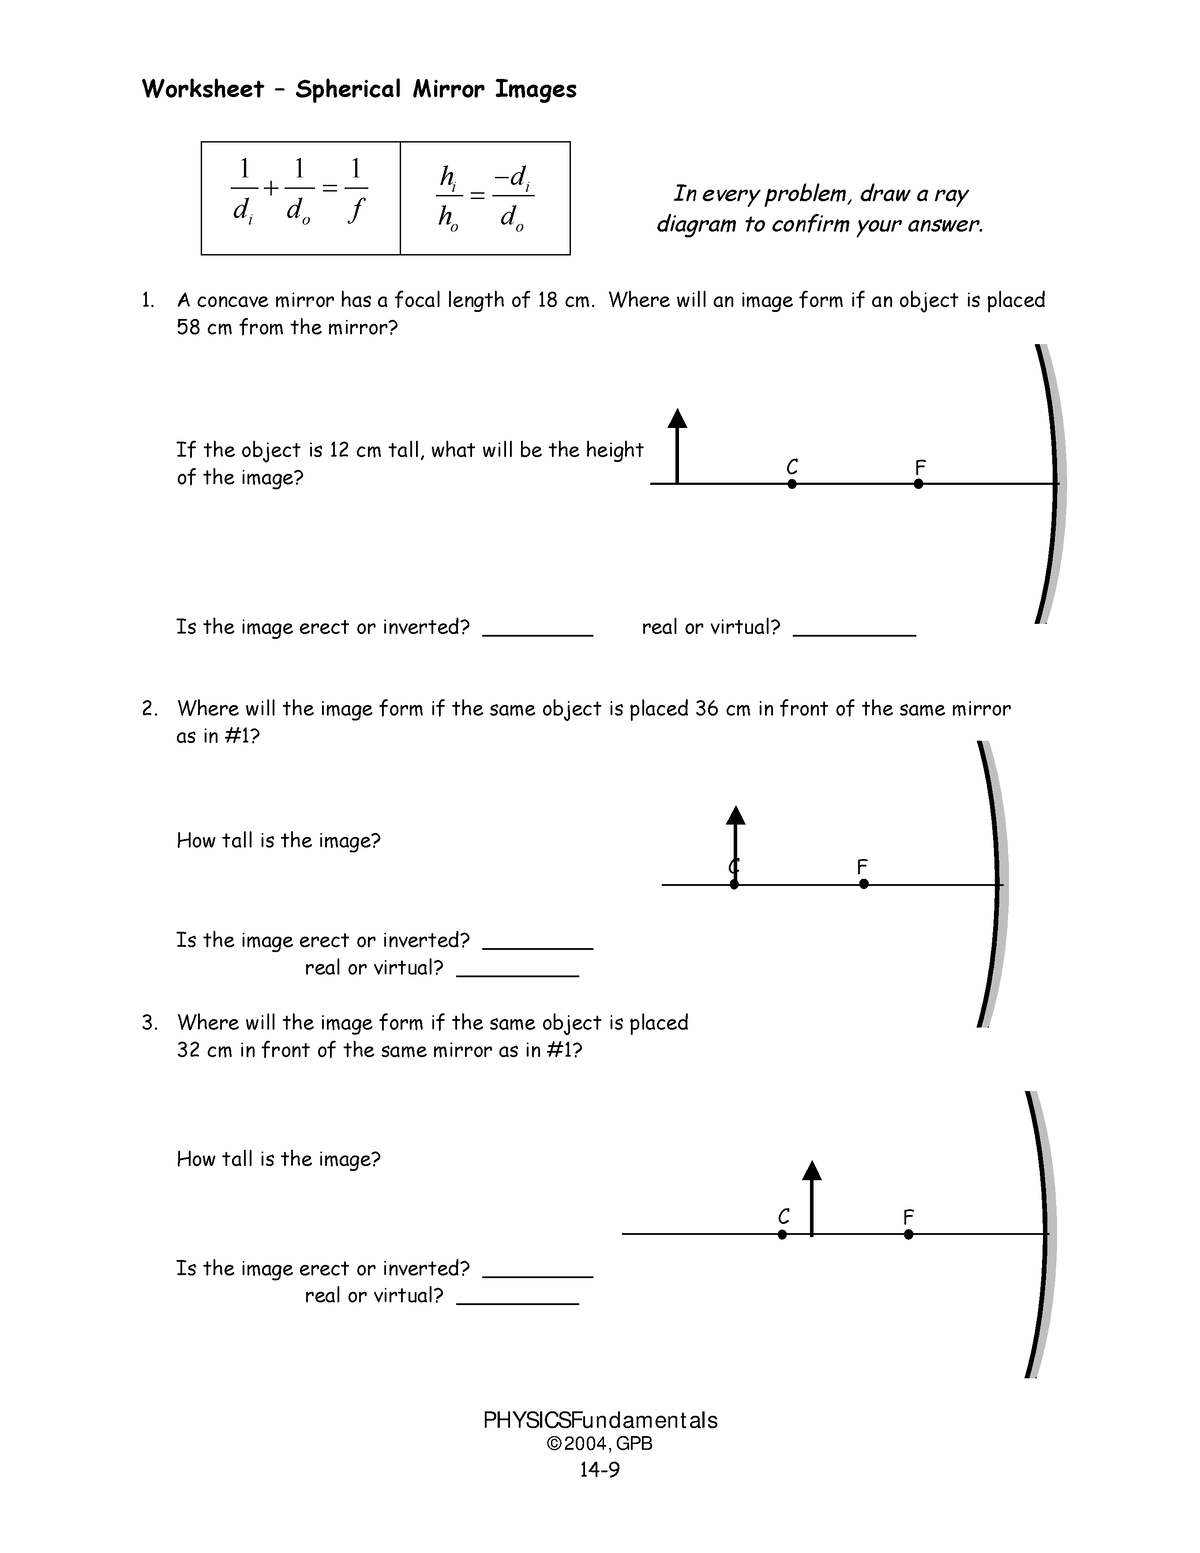 mirrors-worksheet-for-physics-students-worksheet-spherical-mirror-images-physicsfundament